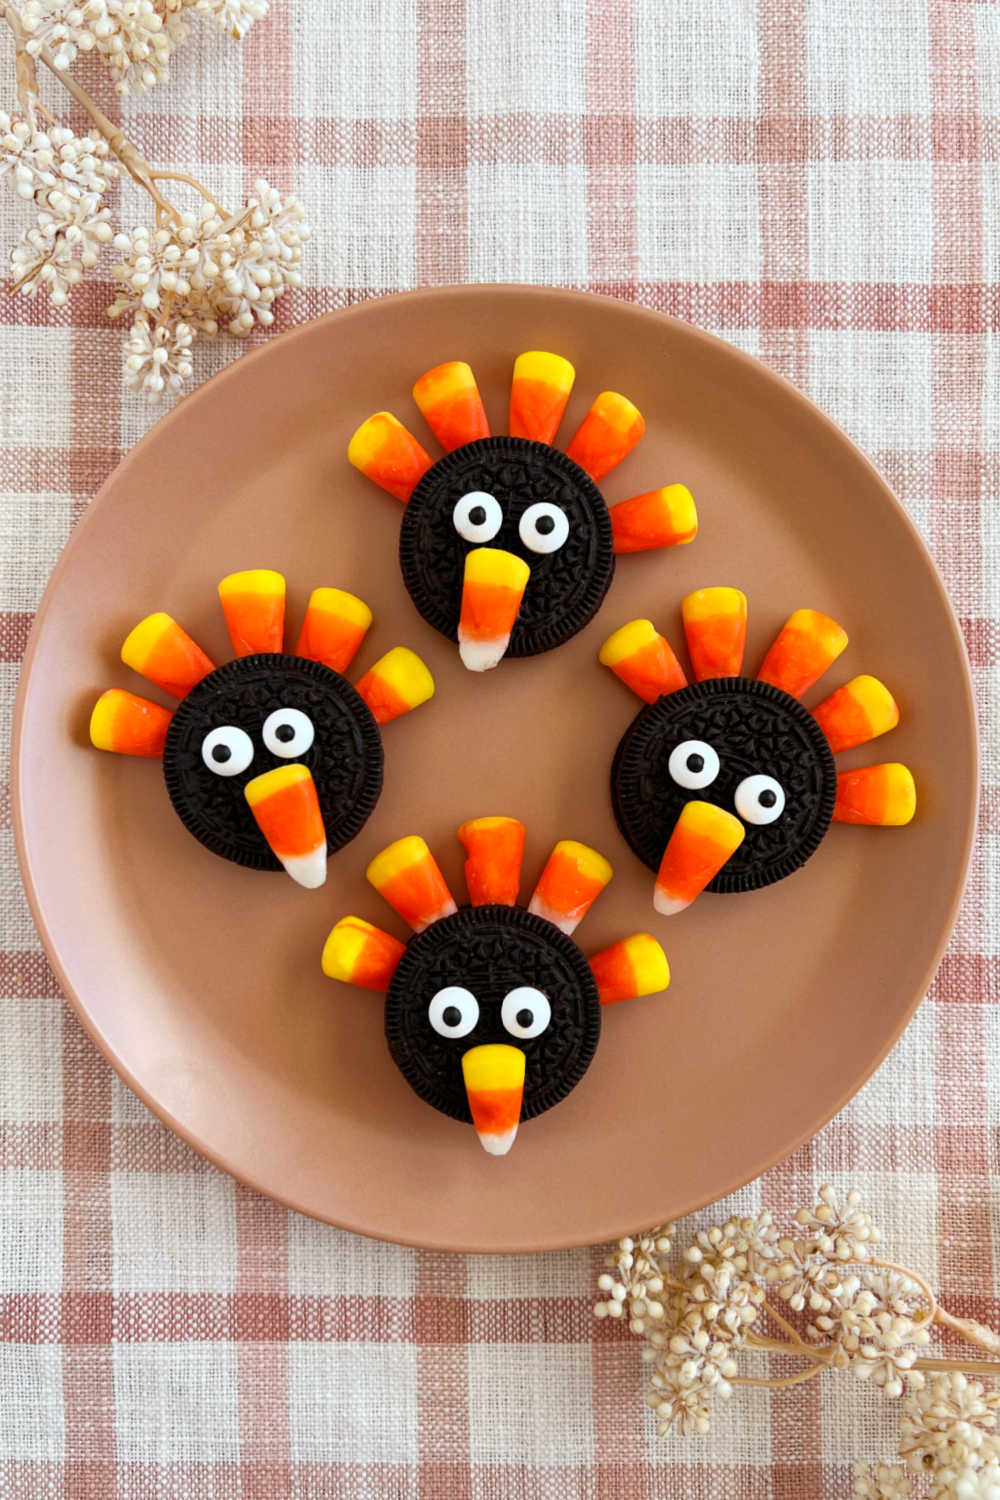 Oreo turkey cookies with Oreos and candy corn on Thanksgiving table